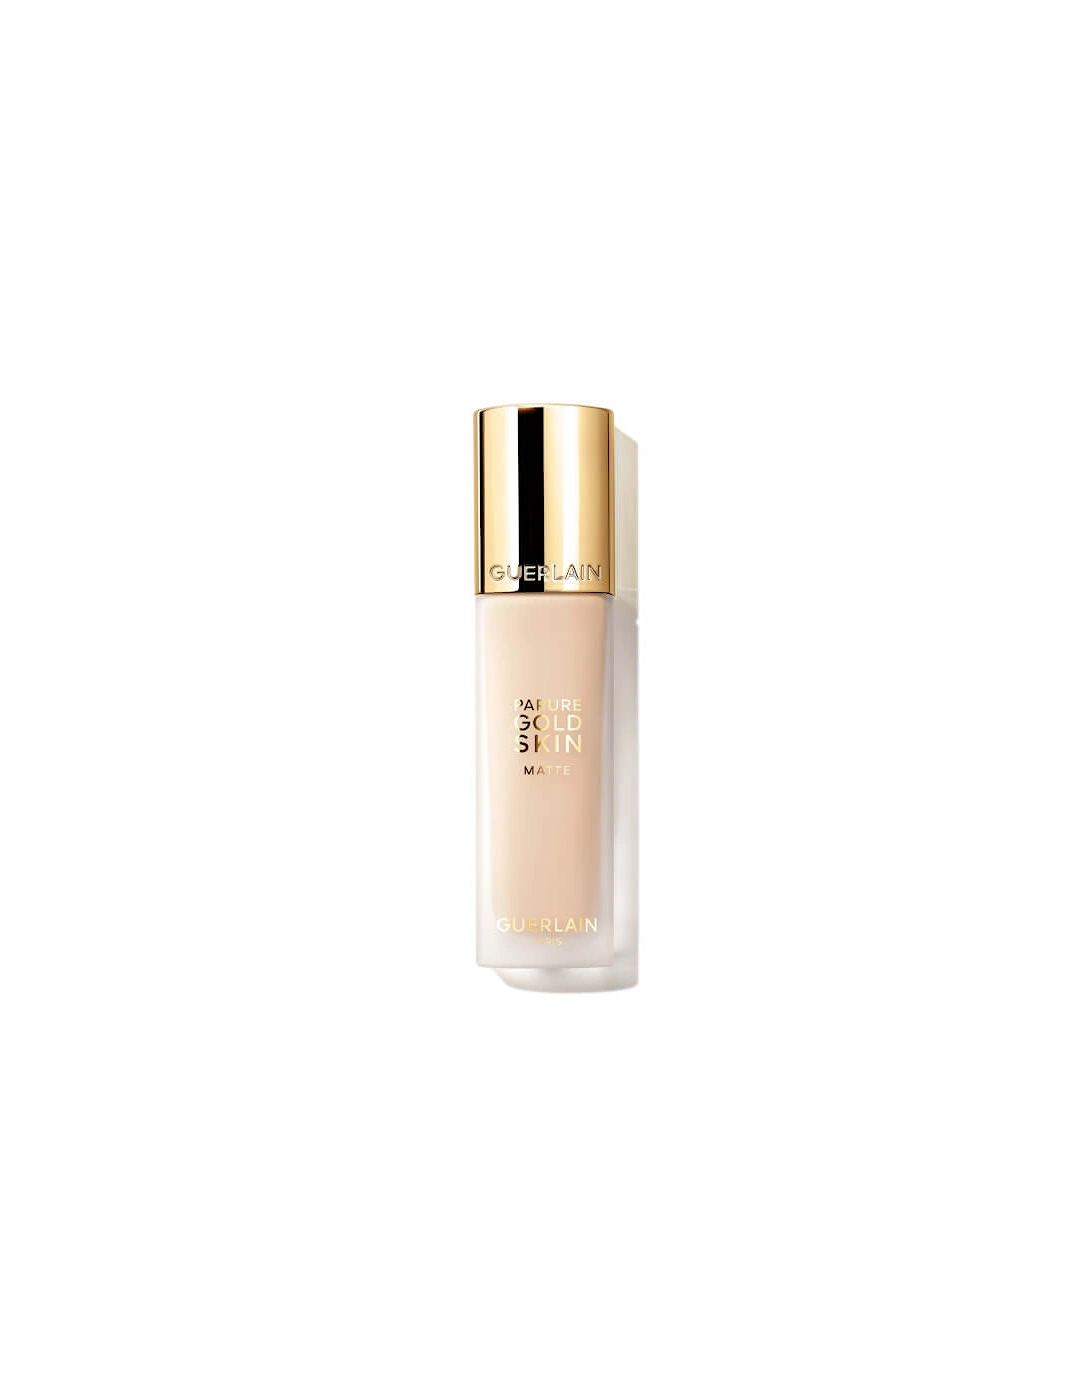 Parure Gold Skin 24H No-Transfer High Perfection Foundation - 0N Neutral / Neutre, 2 of 1